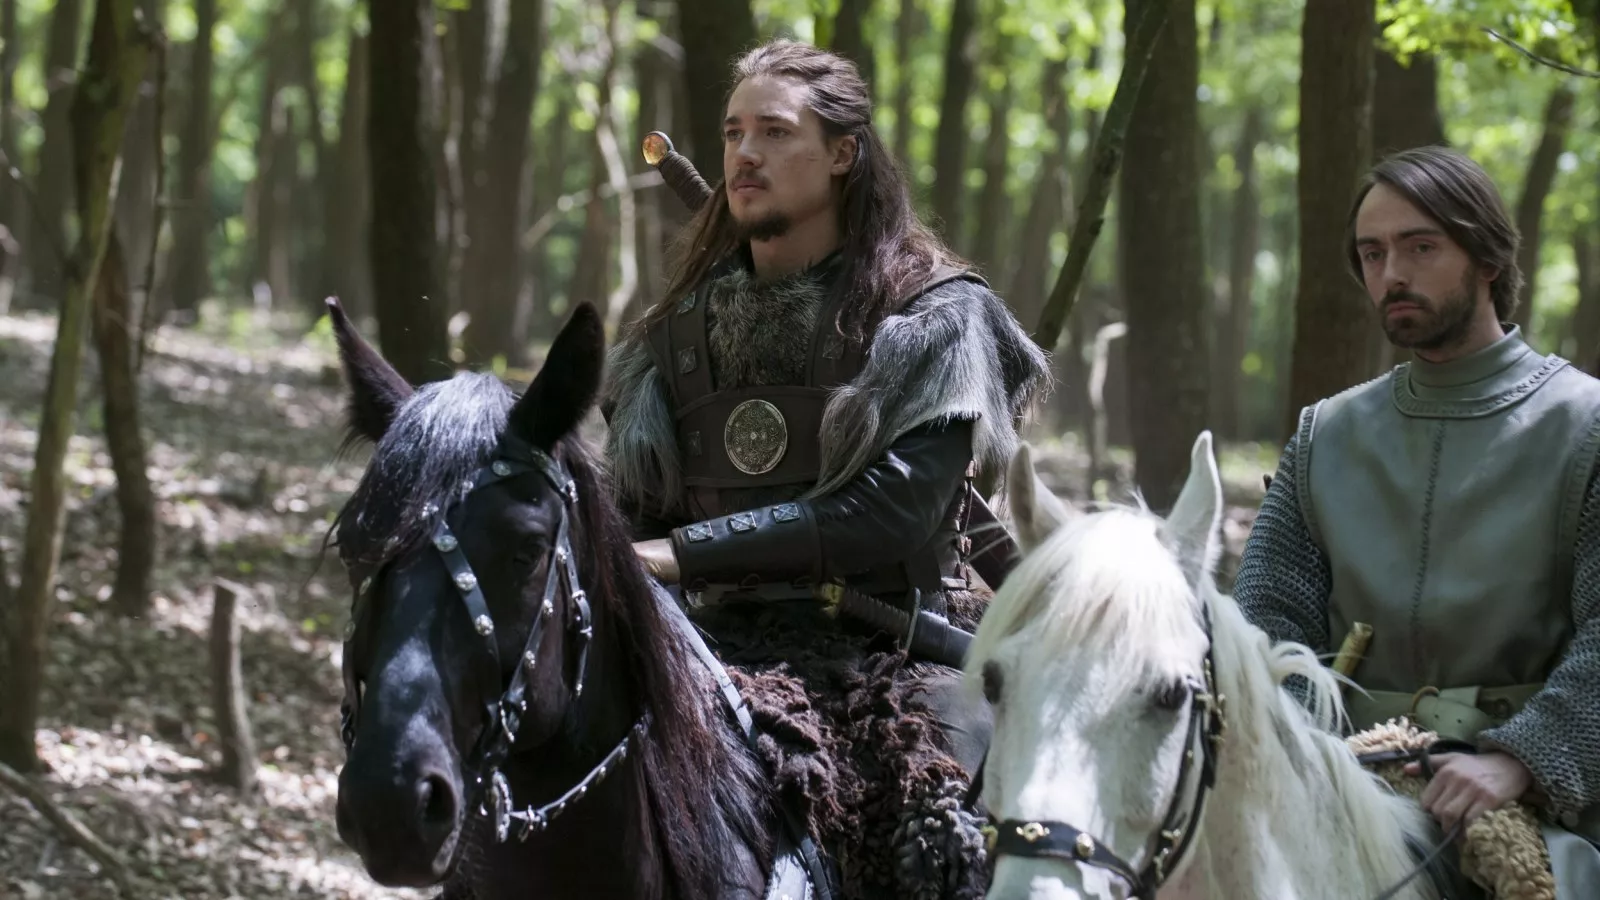 Is this who Uhtred of Bebbanburg is loosely based on? : r